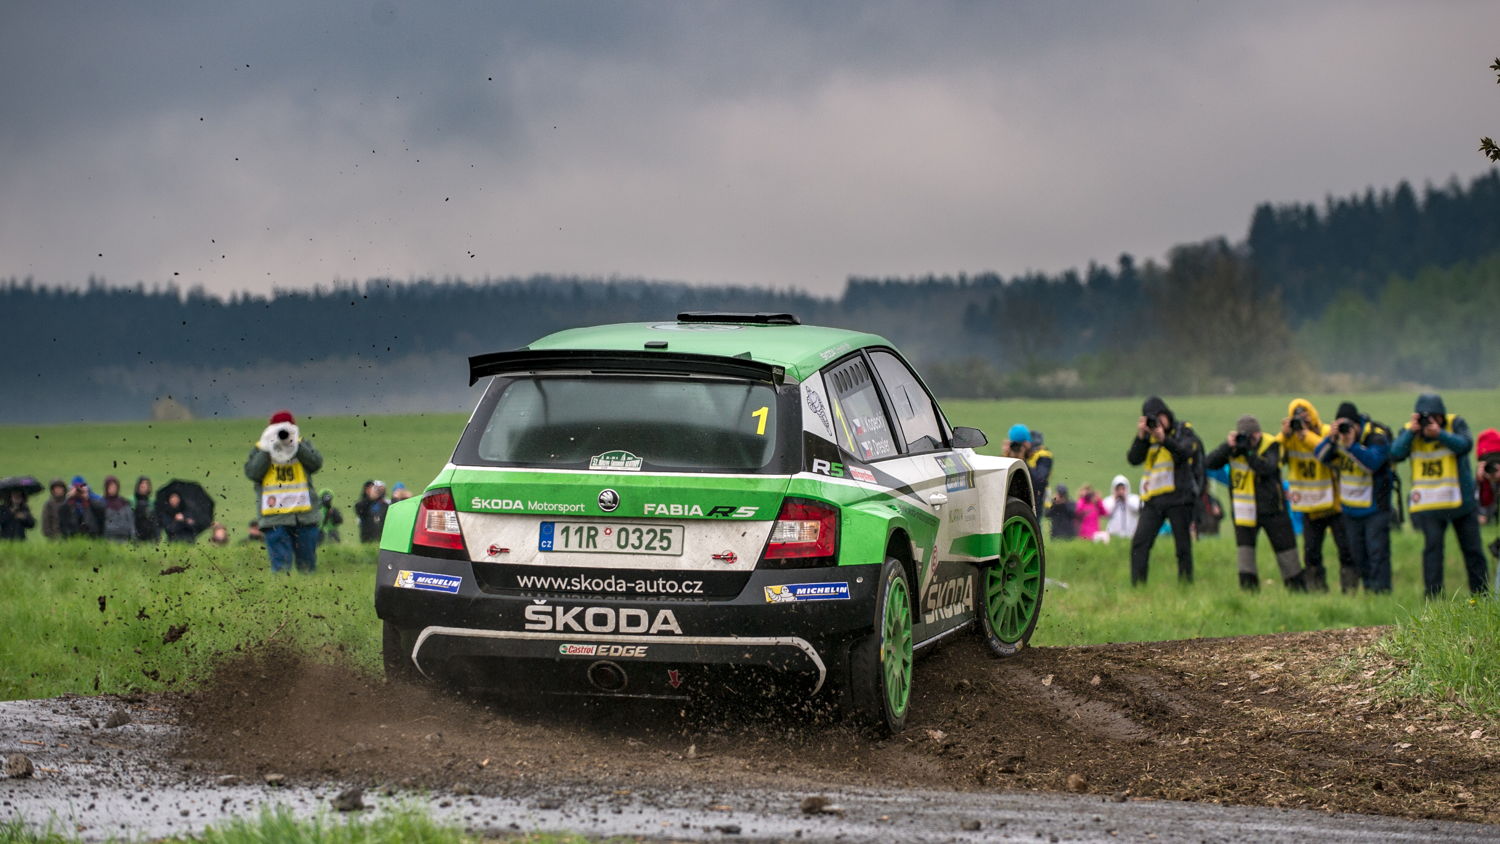 Jan Kopecký and Pavel Dresler for the first time in 2017 driving a ŠKODA FABIA R5 in a gravel event.